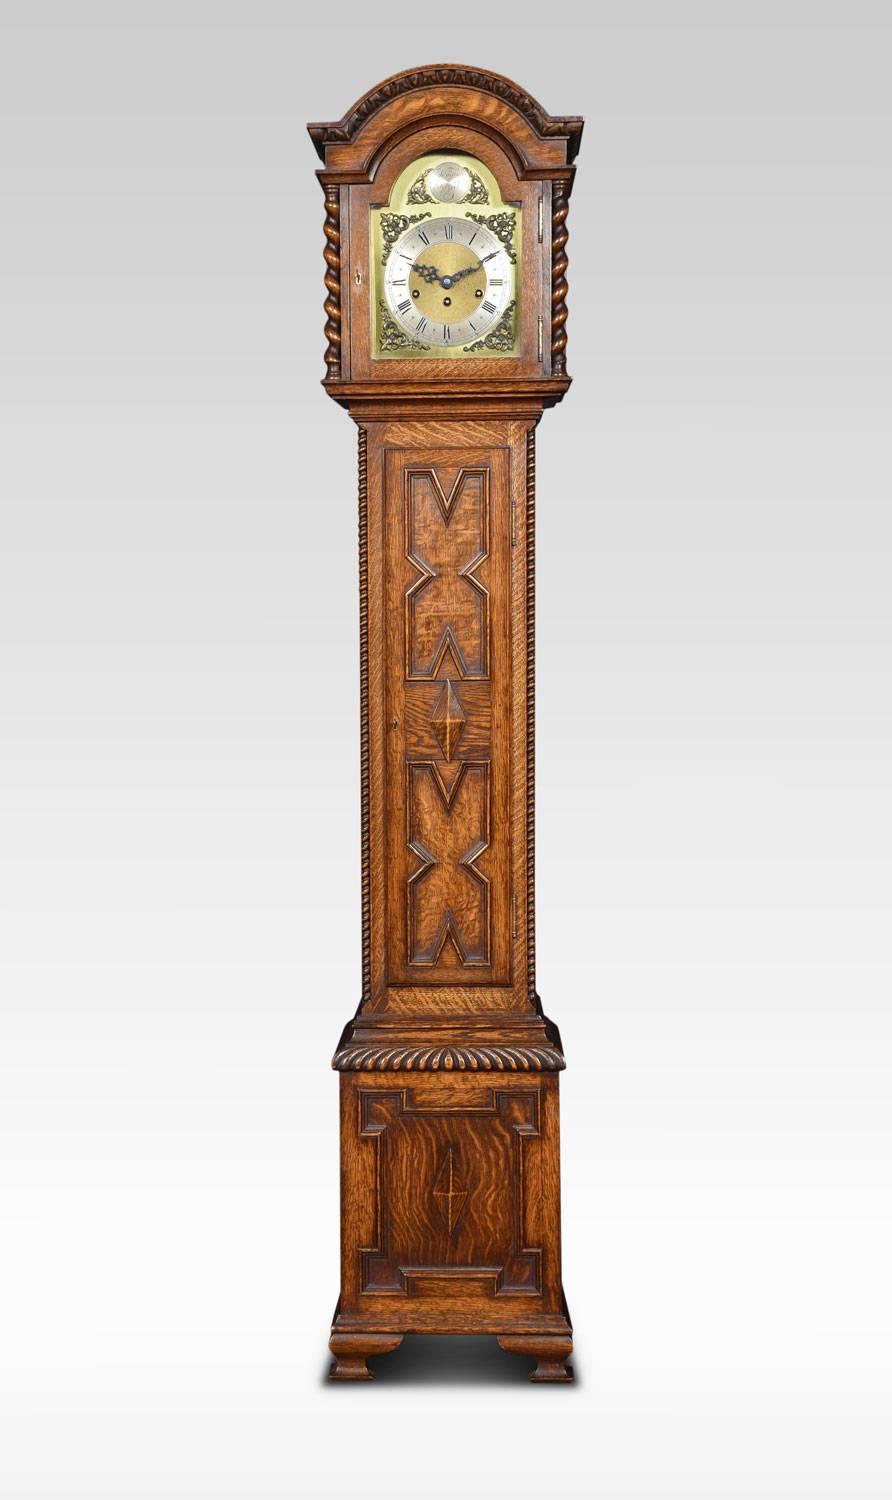 Oak cased grandmother clock, the three train movement by Junghans, the silvered chapter ring with Roman and Arabic numerals, with scroll and floral cast spandrel mounted corners. Striking on eight gongs. The arched hood flanked by twisting columns,